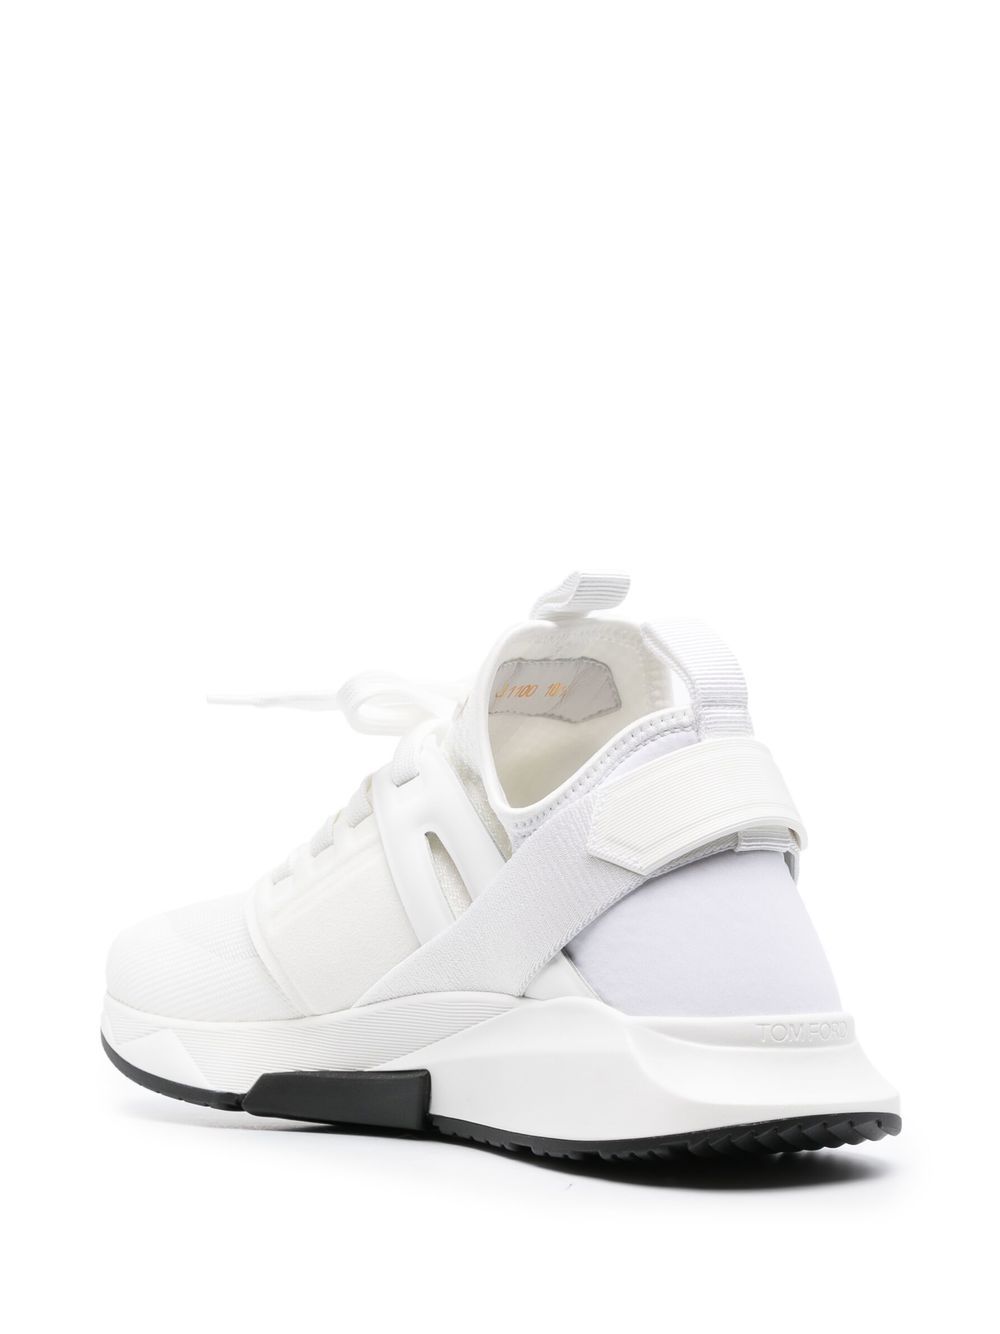 TOM FORD Men's White Neoprene and Suede Lace-Up Sneaker for FW23